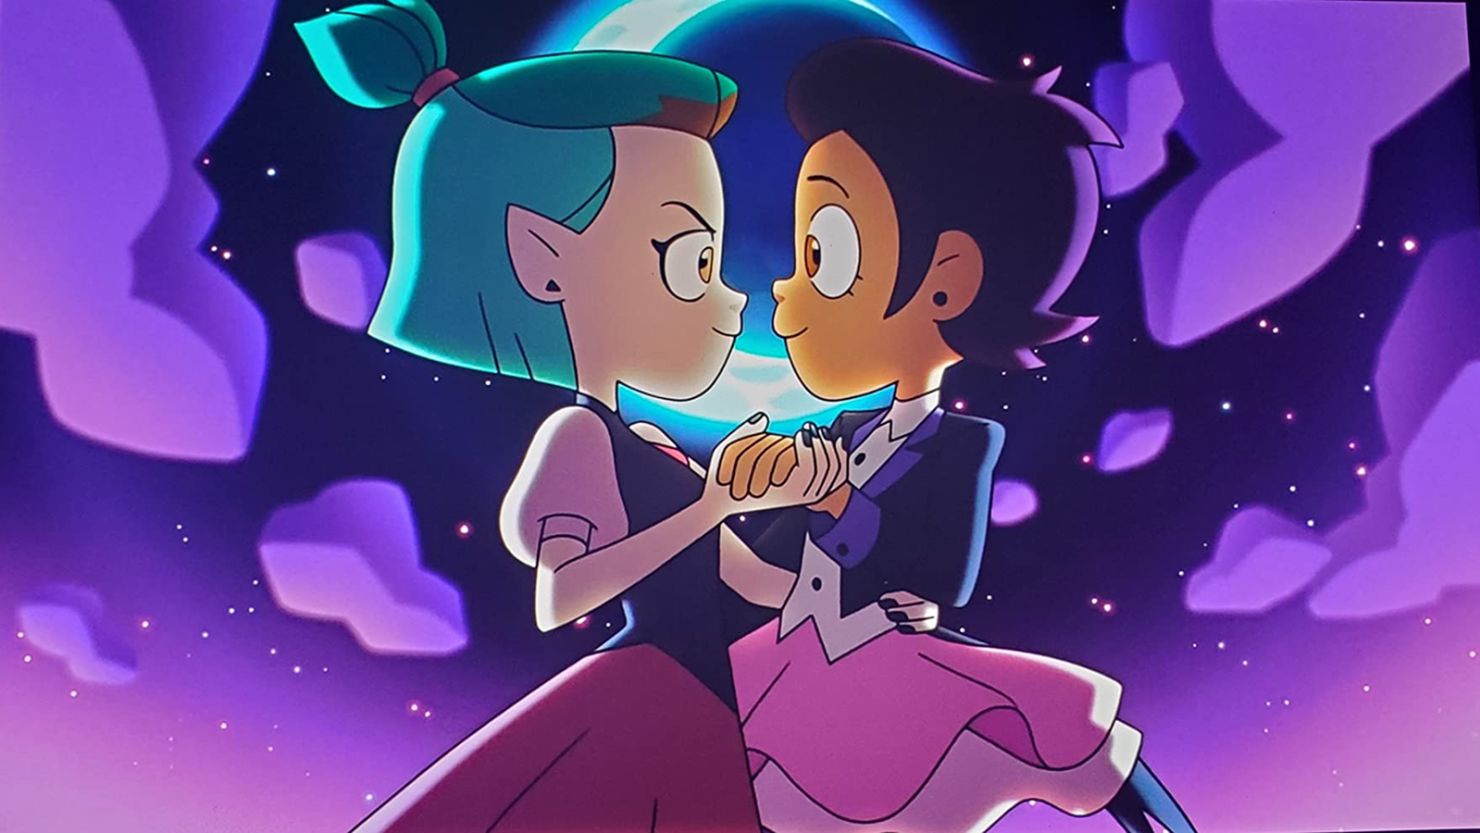 Disney confirms its first ever bisexual character Luz Noceda - the  14-year-old Dominican-American girl in The Owl House